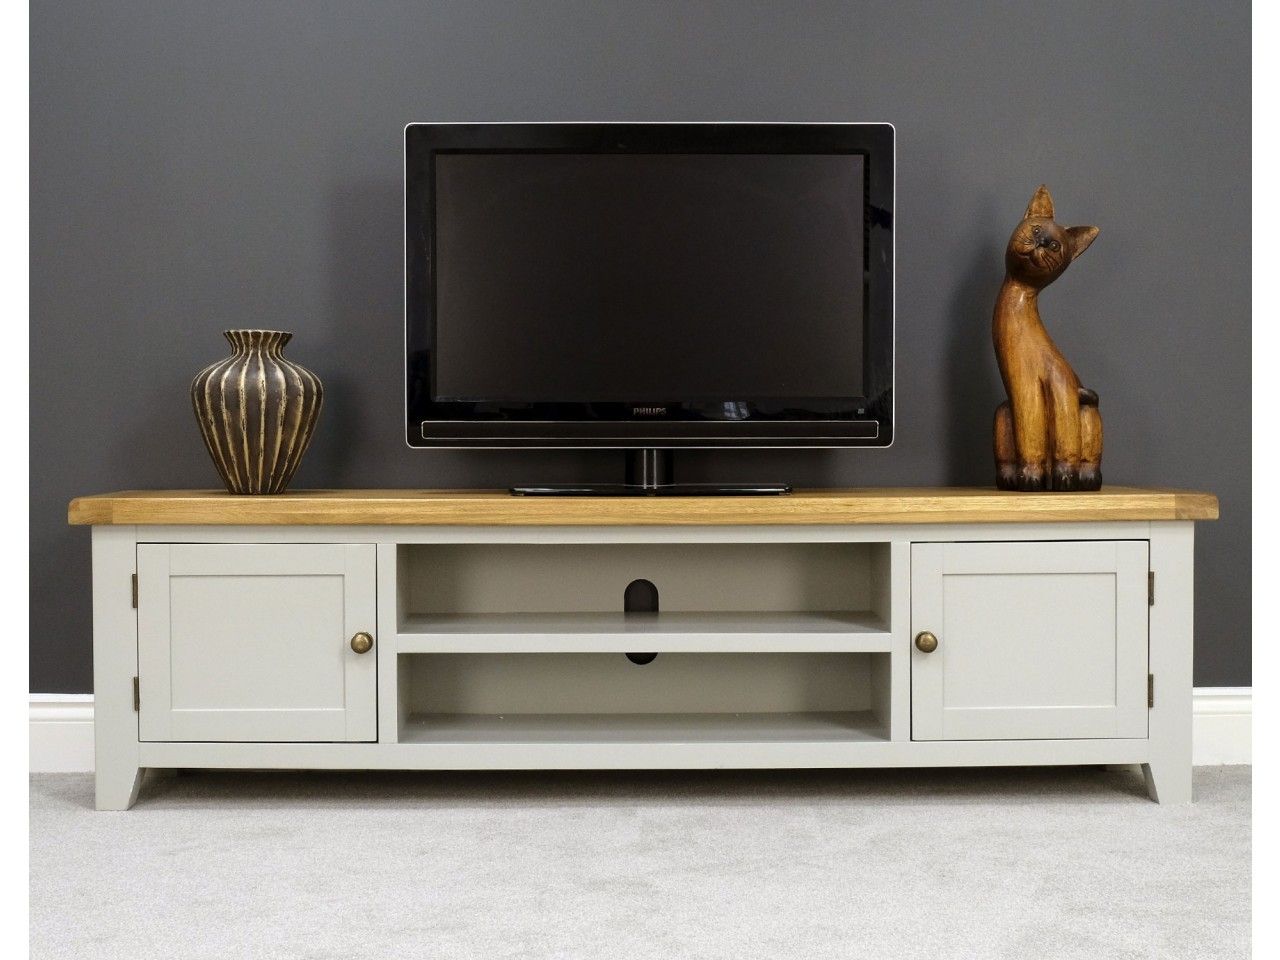 60 Inch Tv Stand with Fireplace New Arklow Painted 180cm Extra Tv Unit for Screens Up to